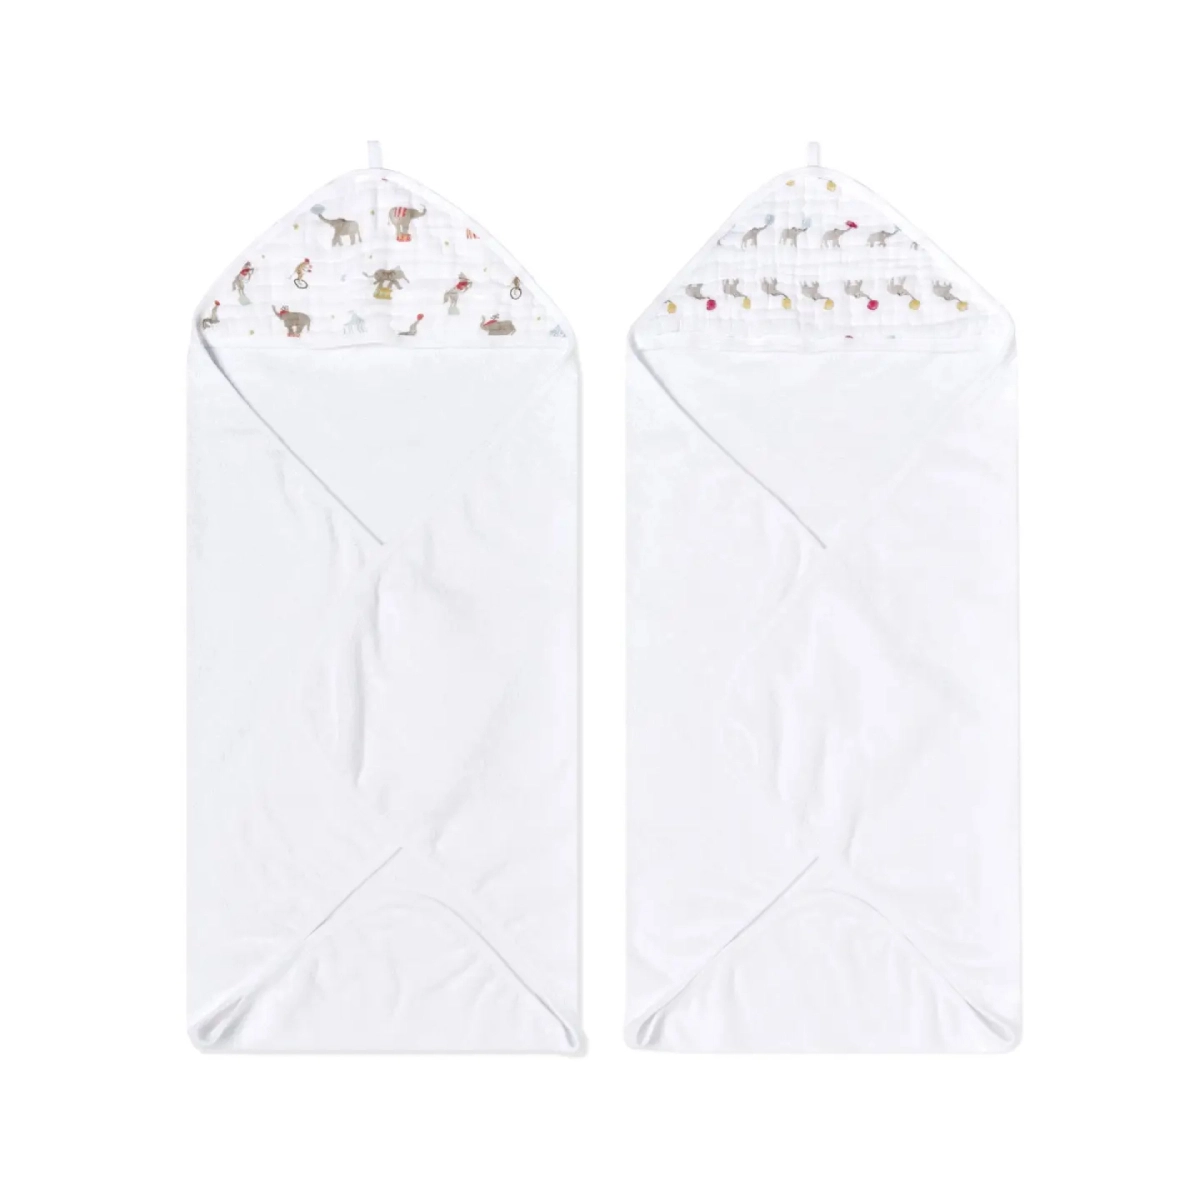 Image of Aden + Anais Pack of 2 Essential Hooded Towel - Elephant Circus (23-19-361)